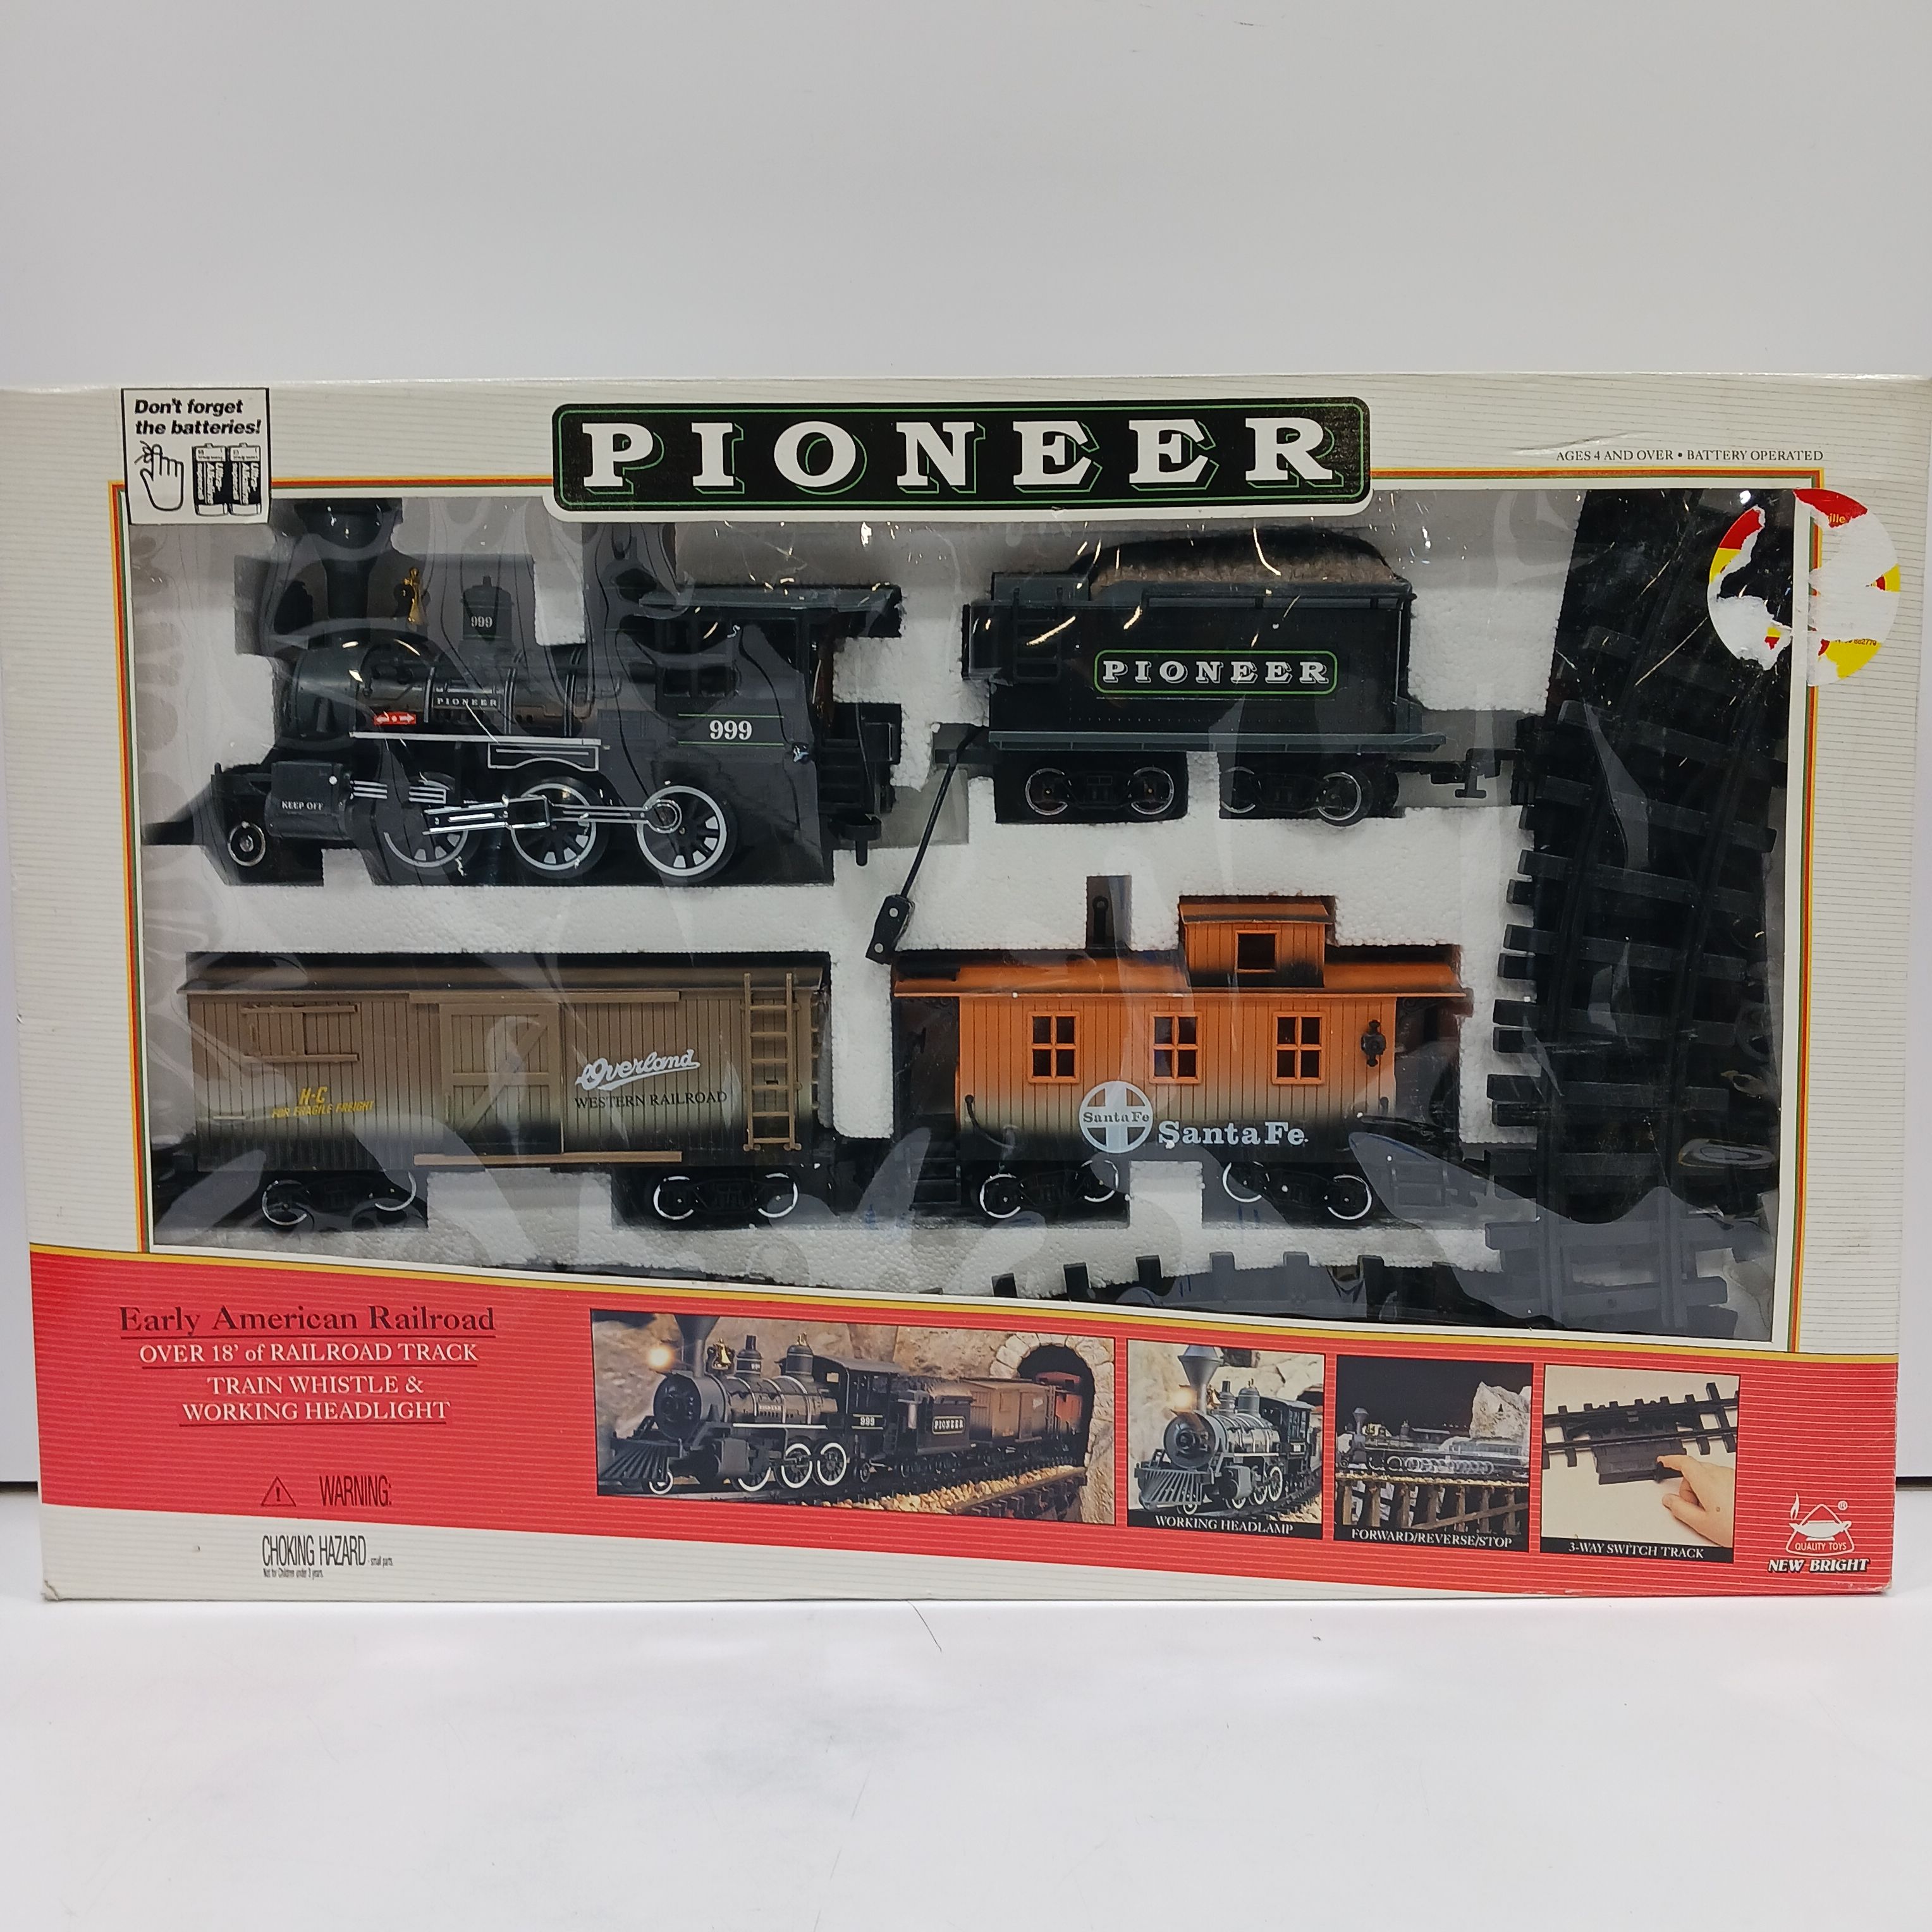 Buy the New Bright Pioneer Early American Railroad Train Set No